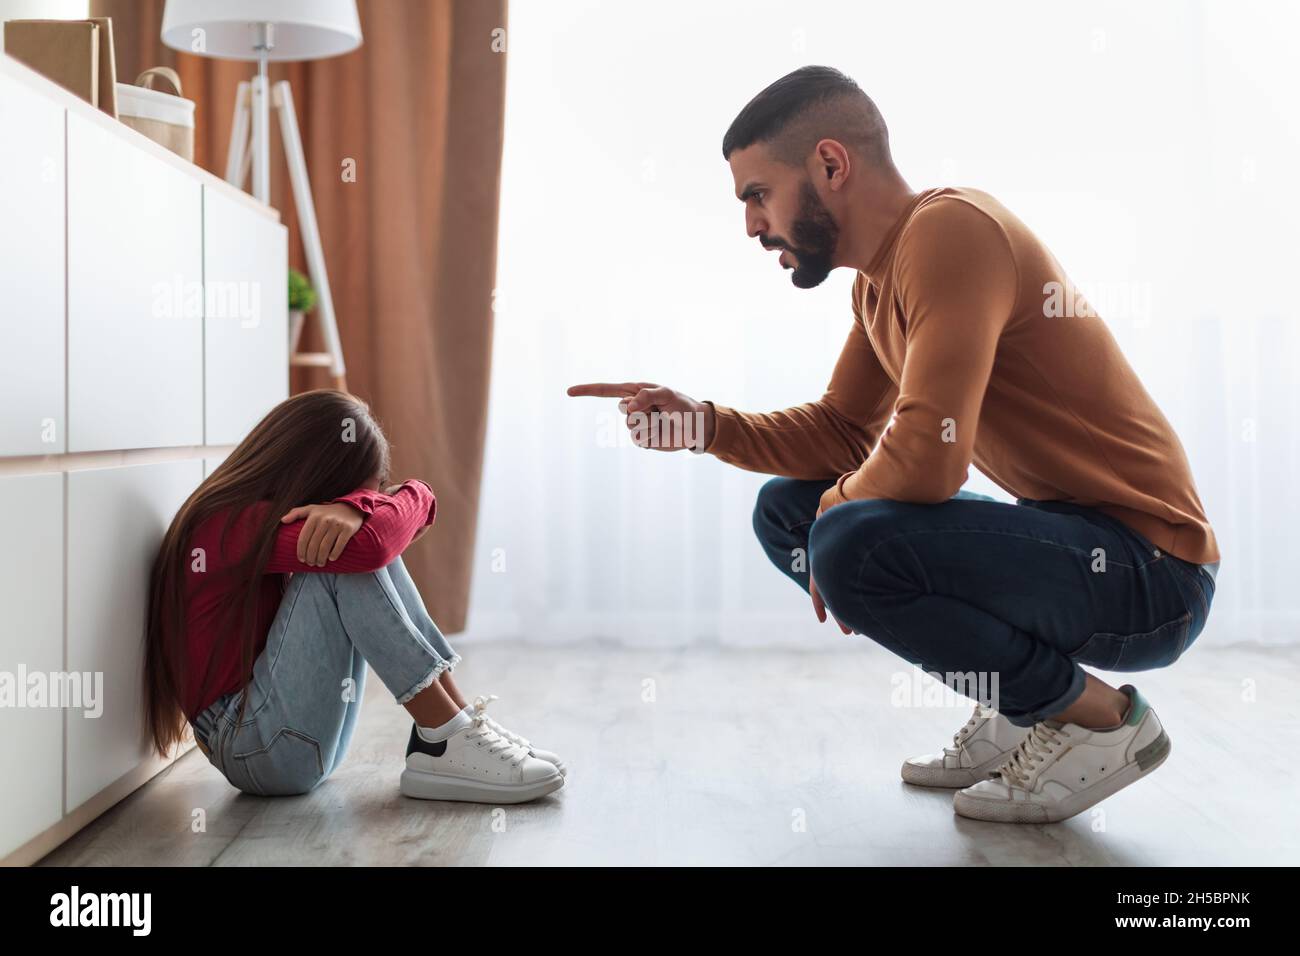 Family Conflict. Angry father scolding sad daughter Stock Photo